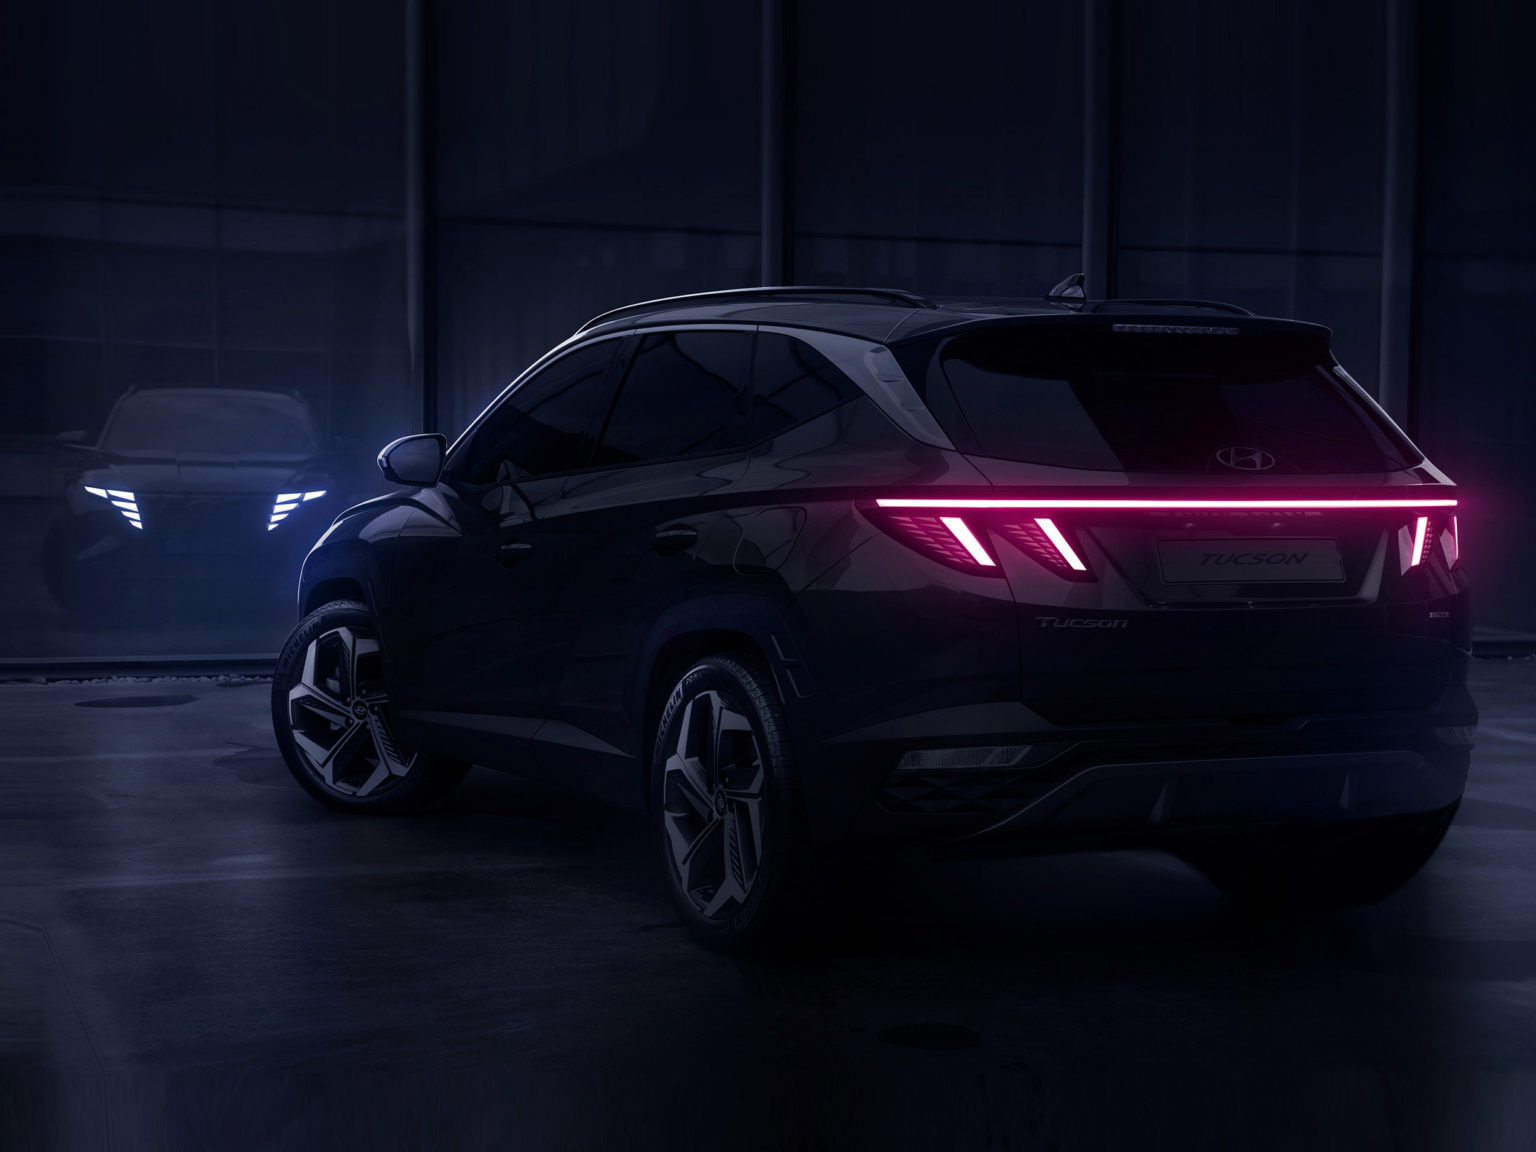 The forthcoming redesigned Hyundai Tucson takes its design cues from the Vision T concept car.